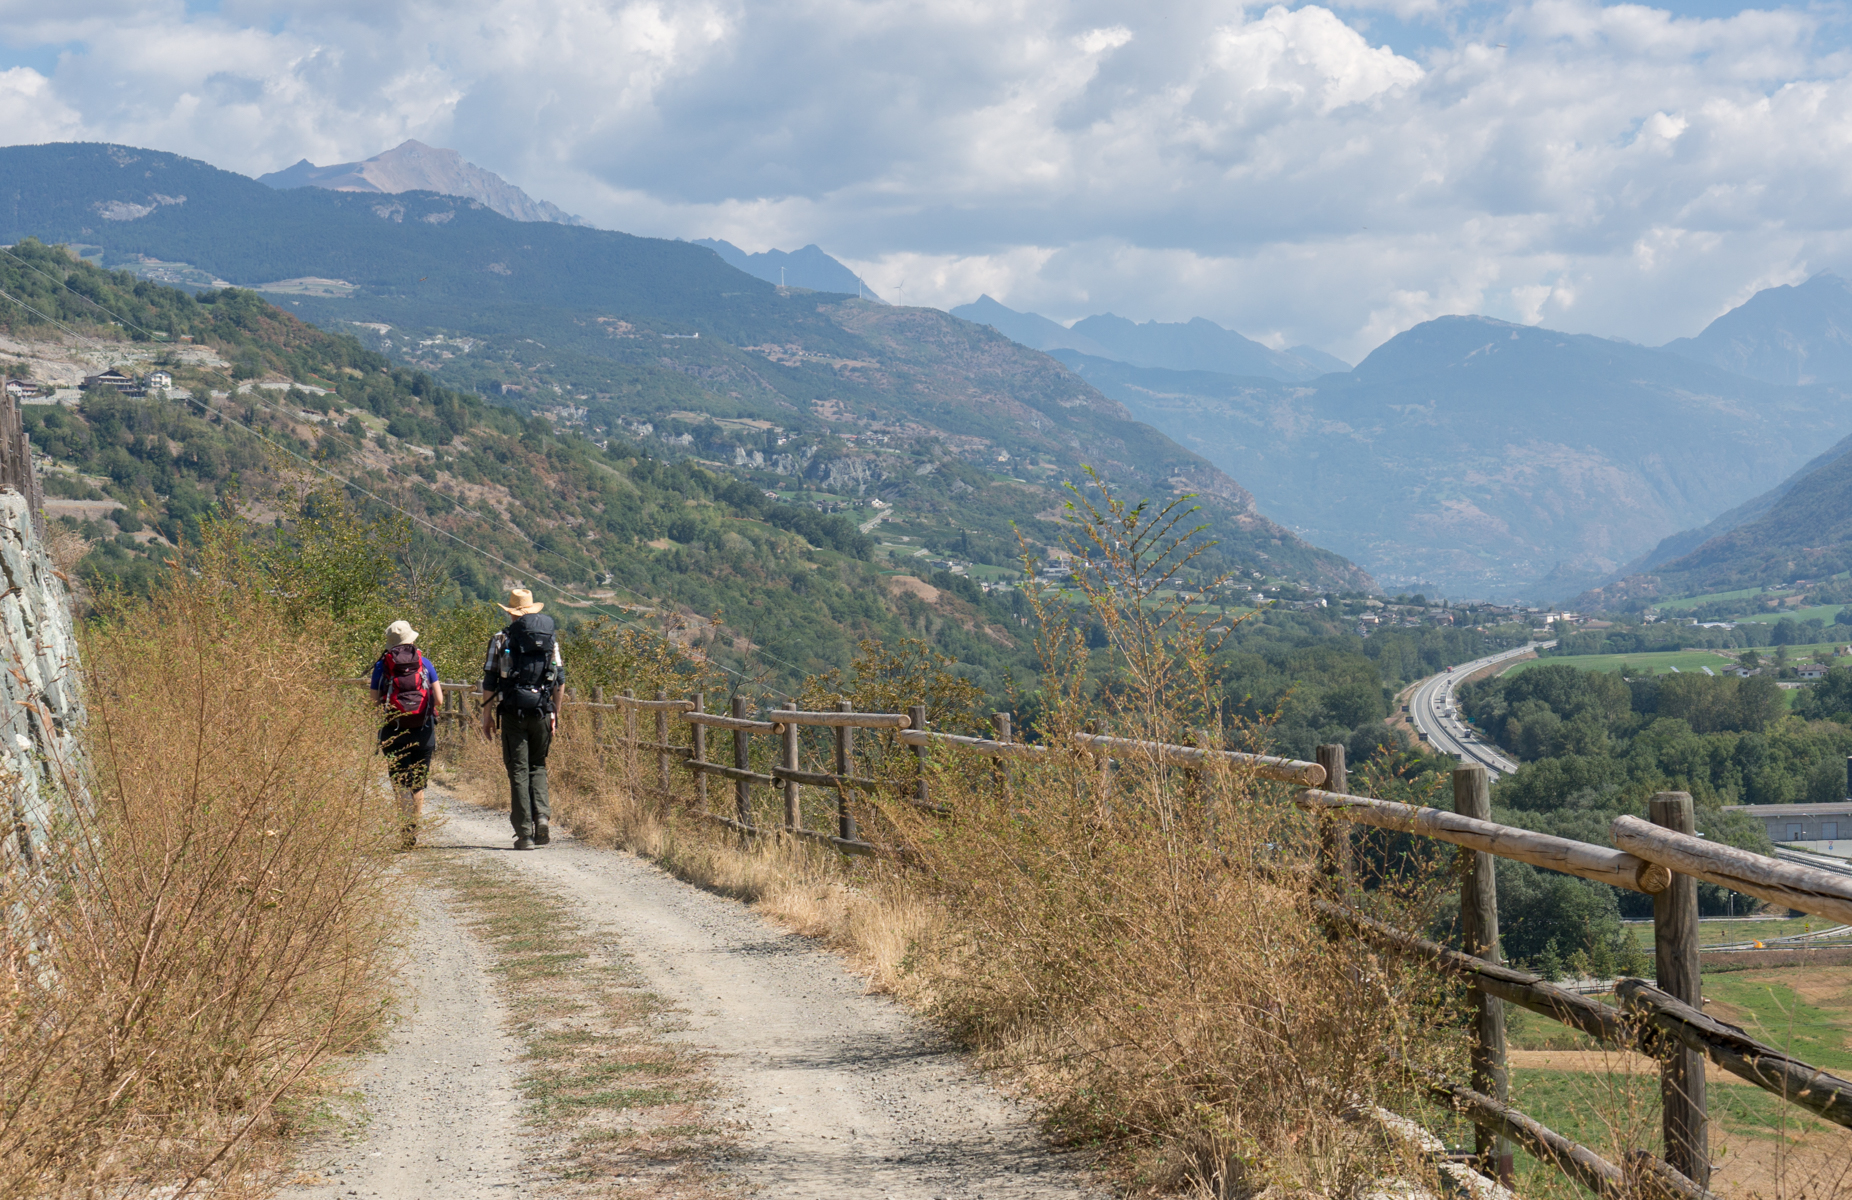 Two pilgrims on the Via Francigena in the Valle d'Aosta, Italy | Photo by Mike Hudak